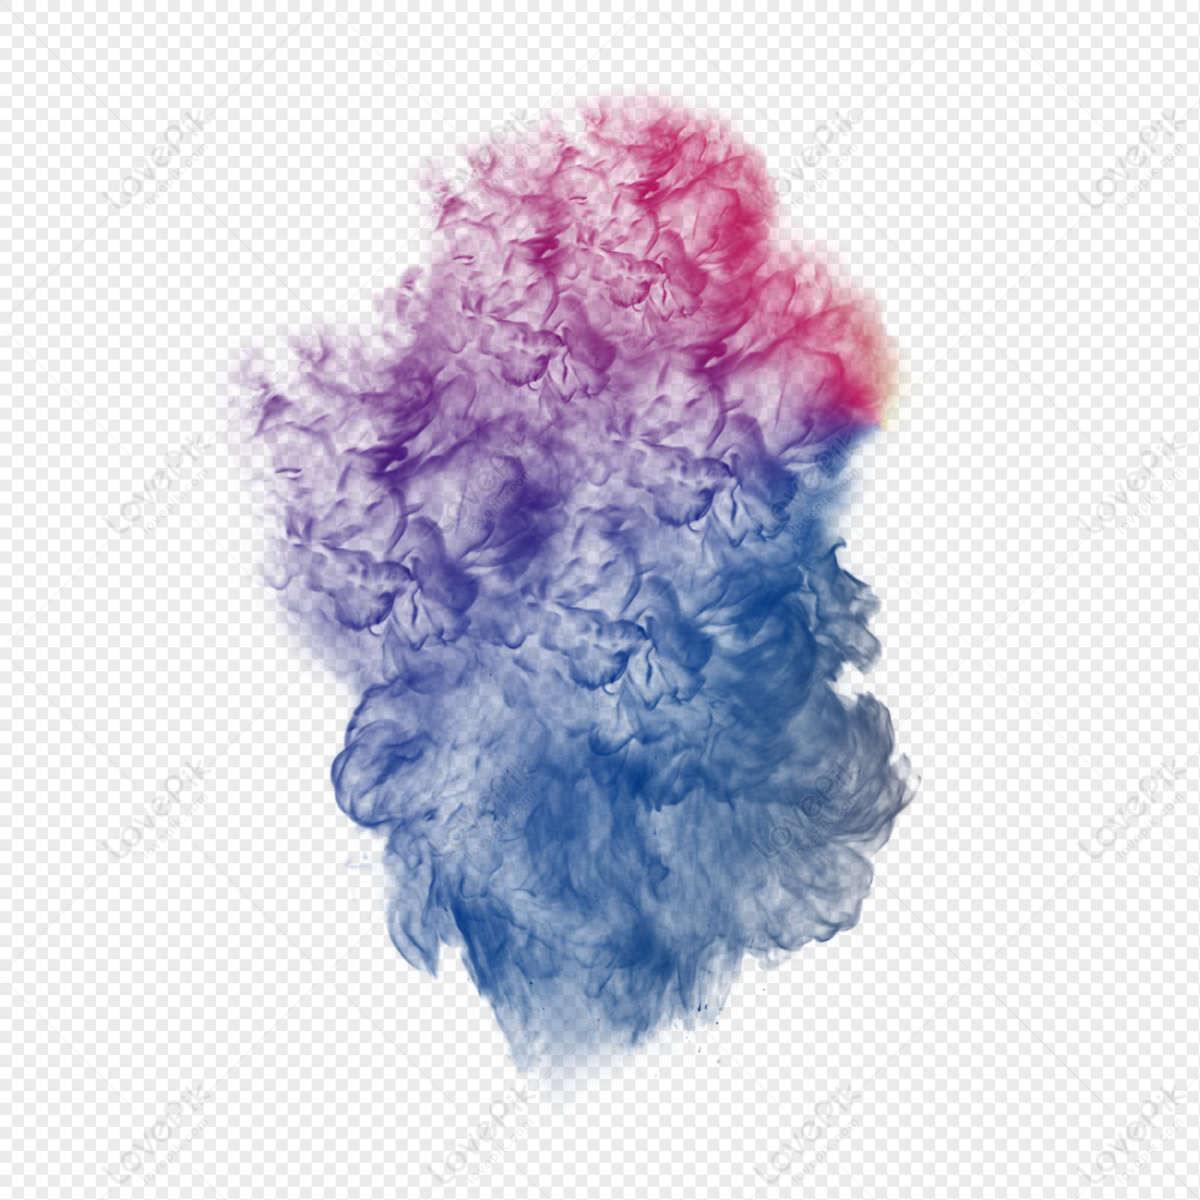 2+ Thousand Color Smoke Png Royalty-Free Images, Stock Photos